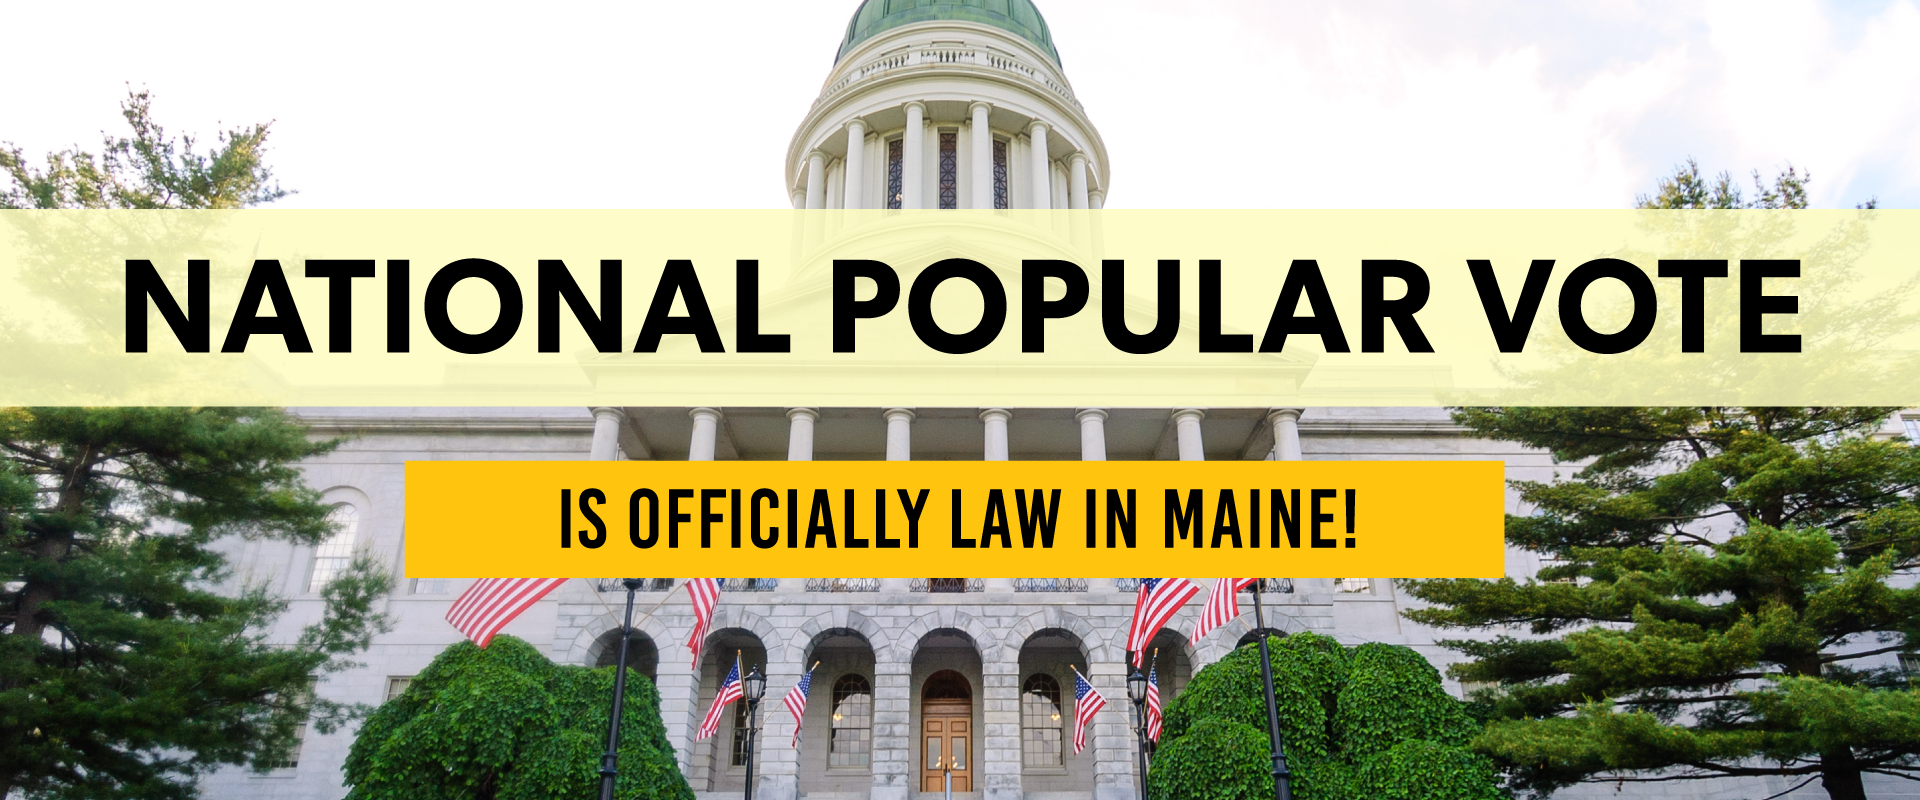 National Popular Vote is now officially law in Maine!